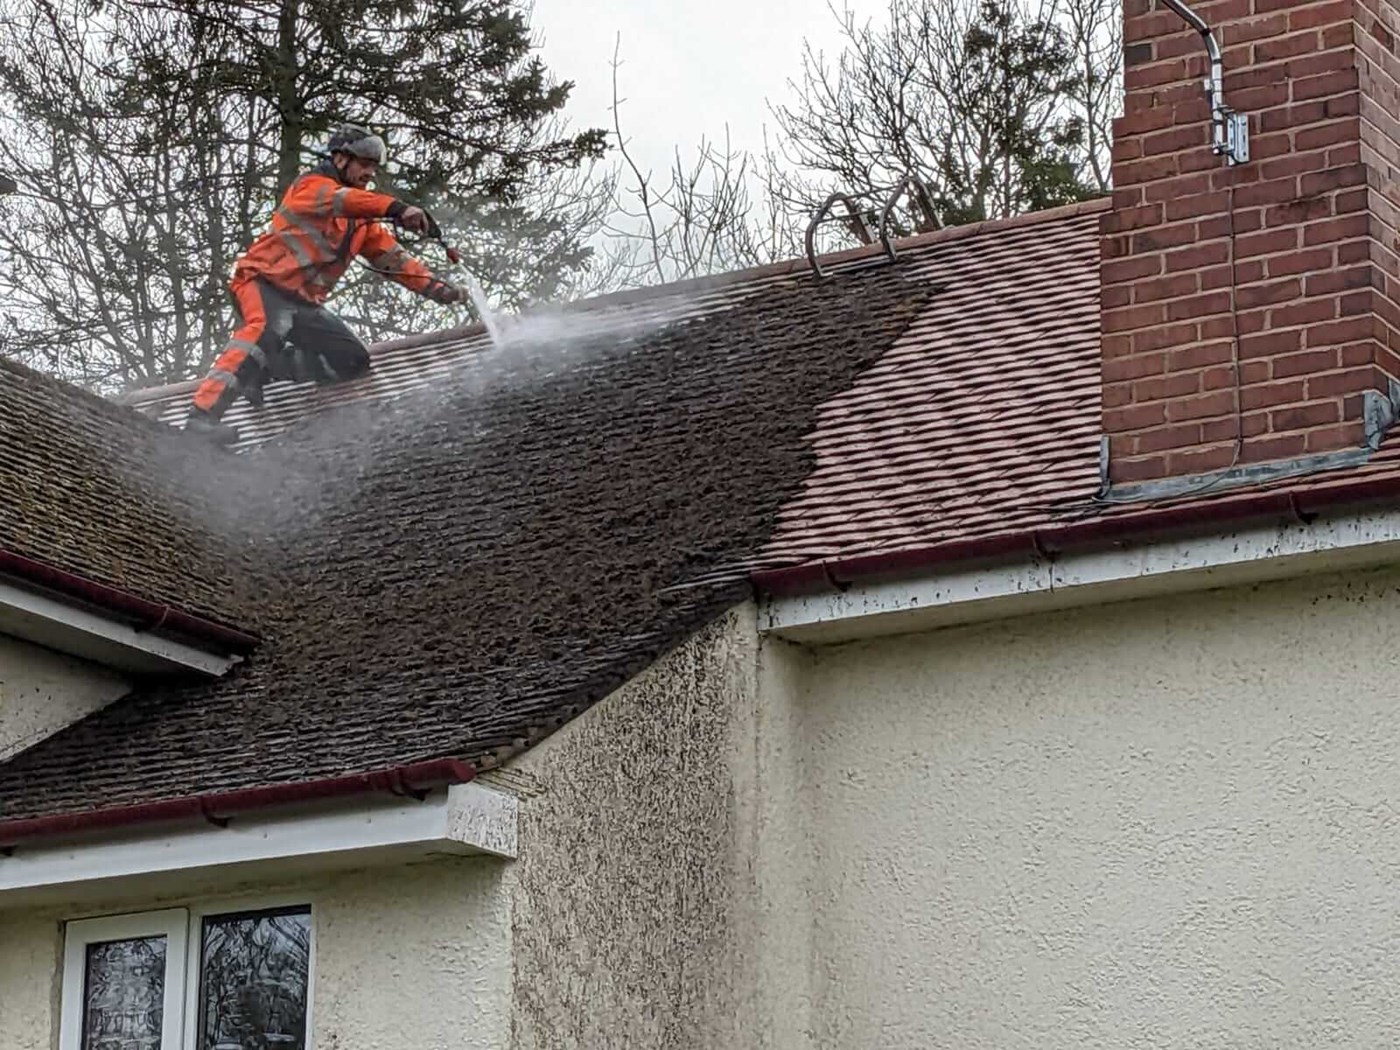 Ways To Clean Your House Roof